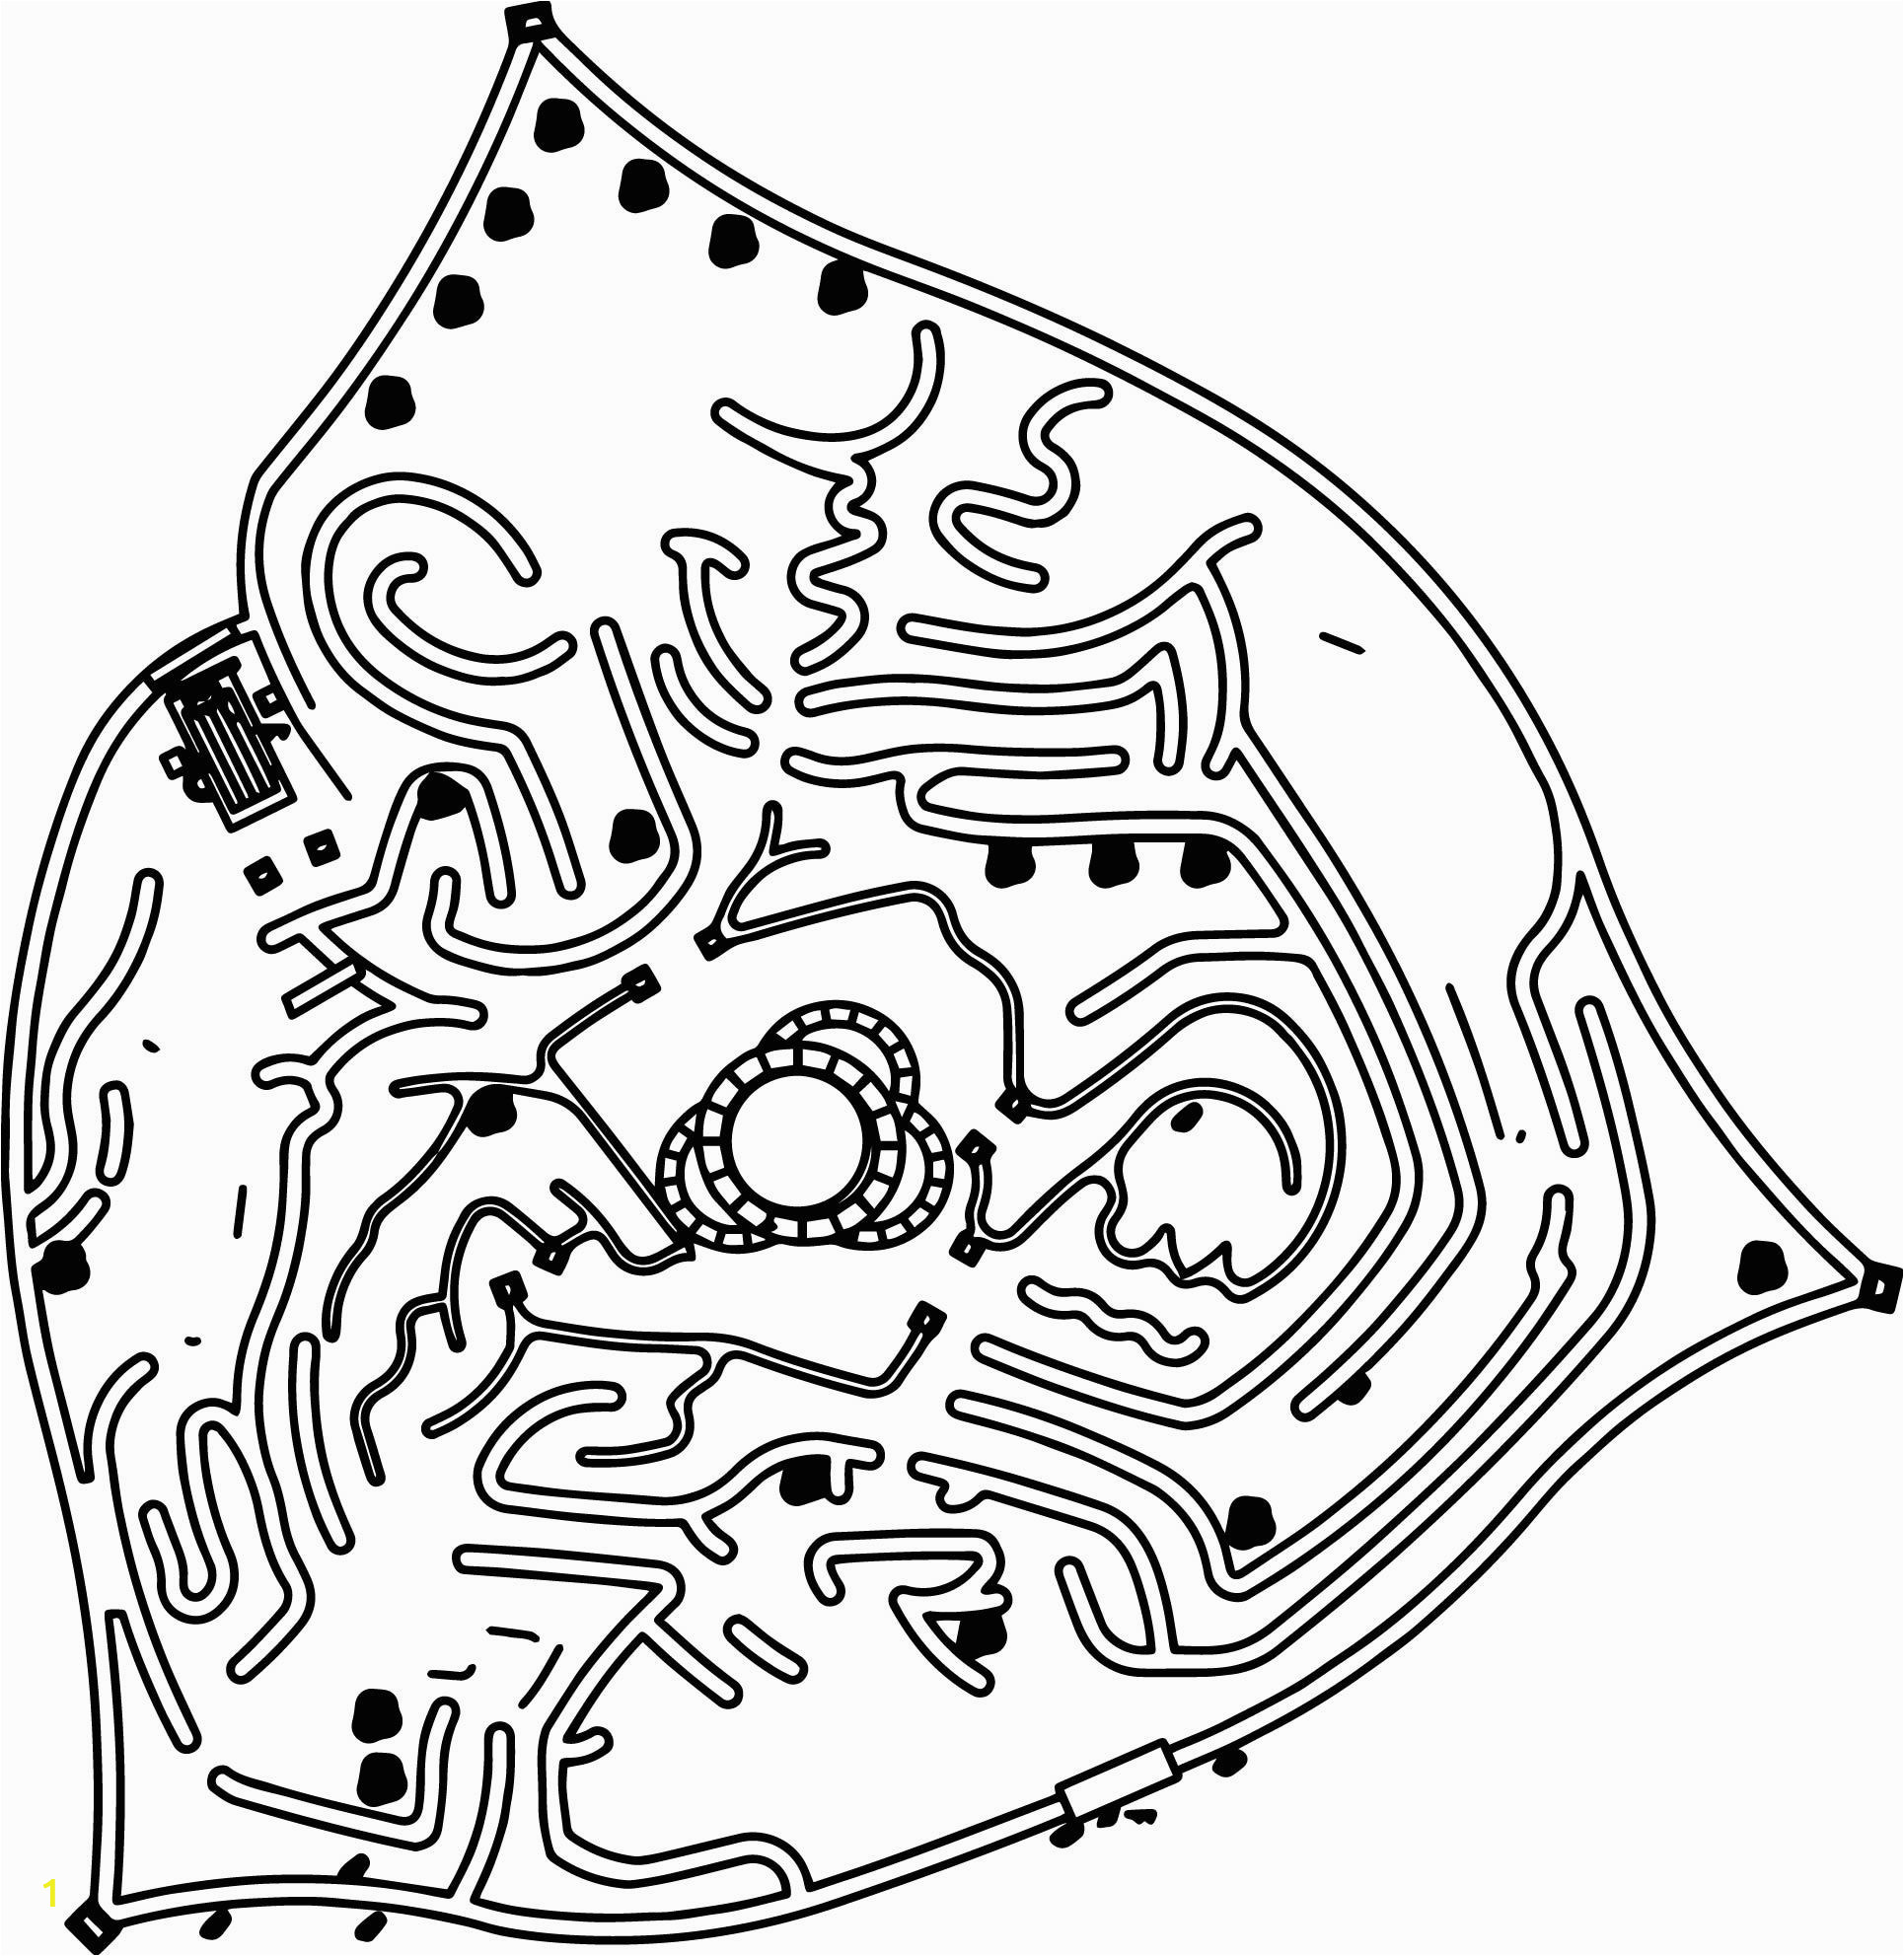 Coloring Pages Disney Alice In Wonderland Awesome Disney Alice In Wonderland Queen Heart Castle and